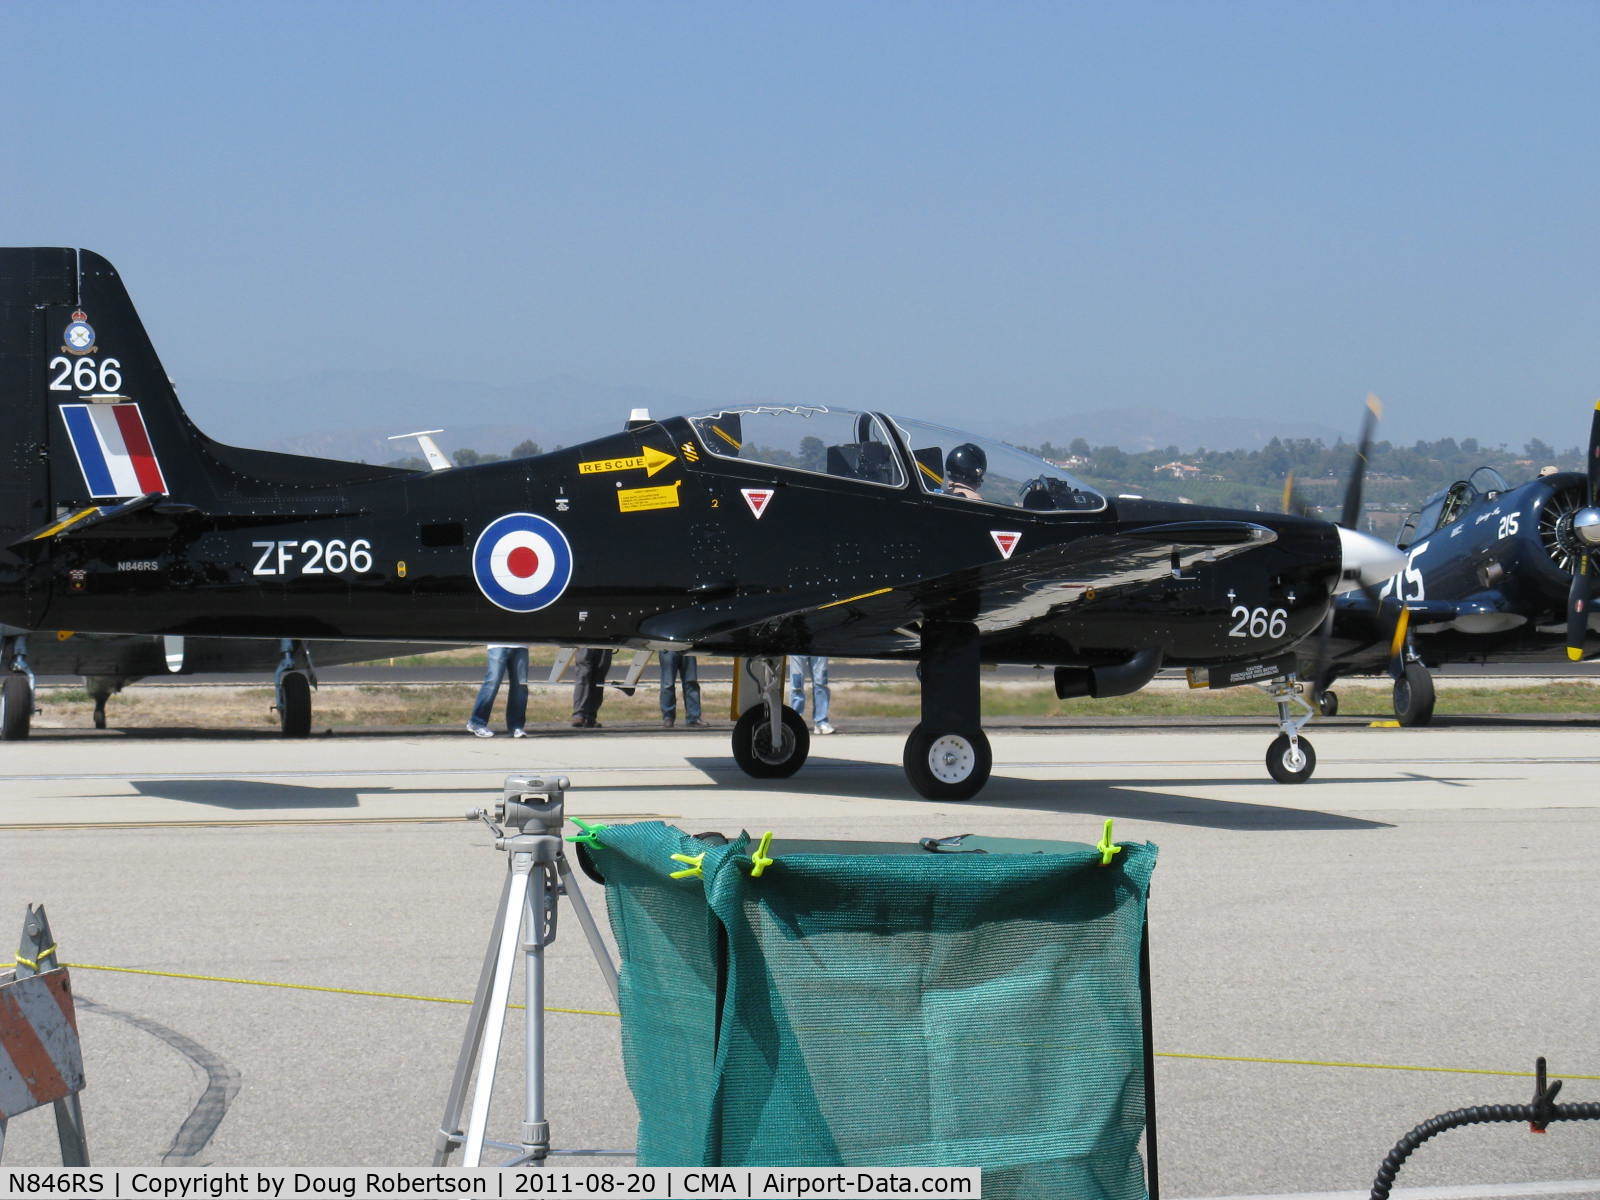 N846RS, 1990 Short S-312 Tucano T1 C/N S056/T50, Short Bros. PLC S312 TUCANO T1 Mk.1, one Garrett TPE331-12B Turboprop 1,100 shp in RAF livery, 4 blade prop, Martin-Baker MB 8LC Ejection Seats, max speed 315 mph, taxi